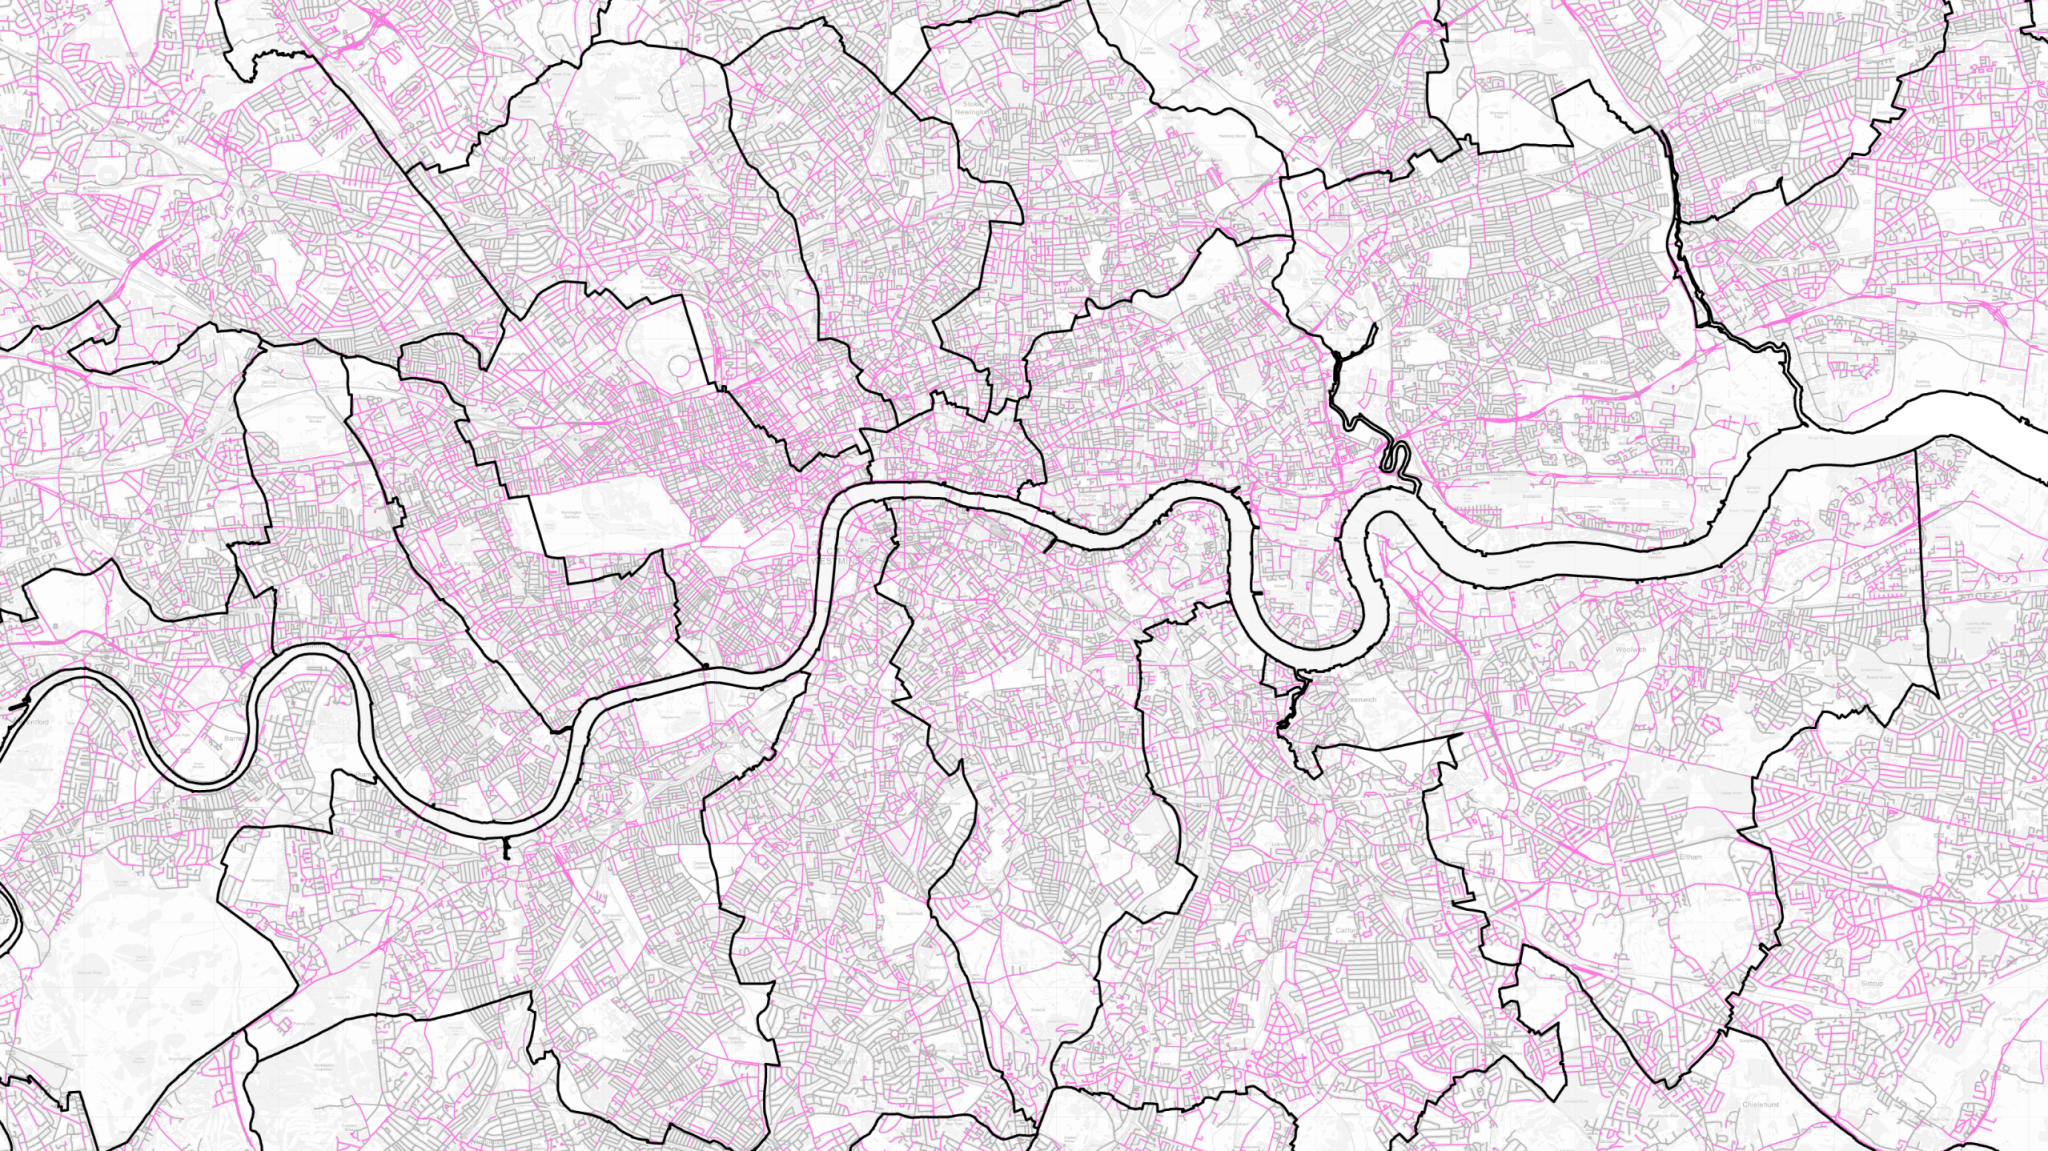 London map separated into boroughs with streets highlighted in pink. Concentration above river, to far east and far south.